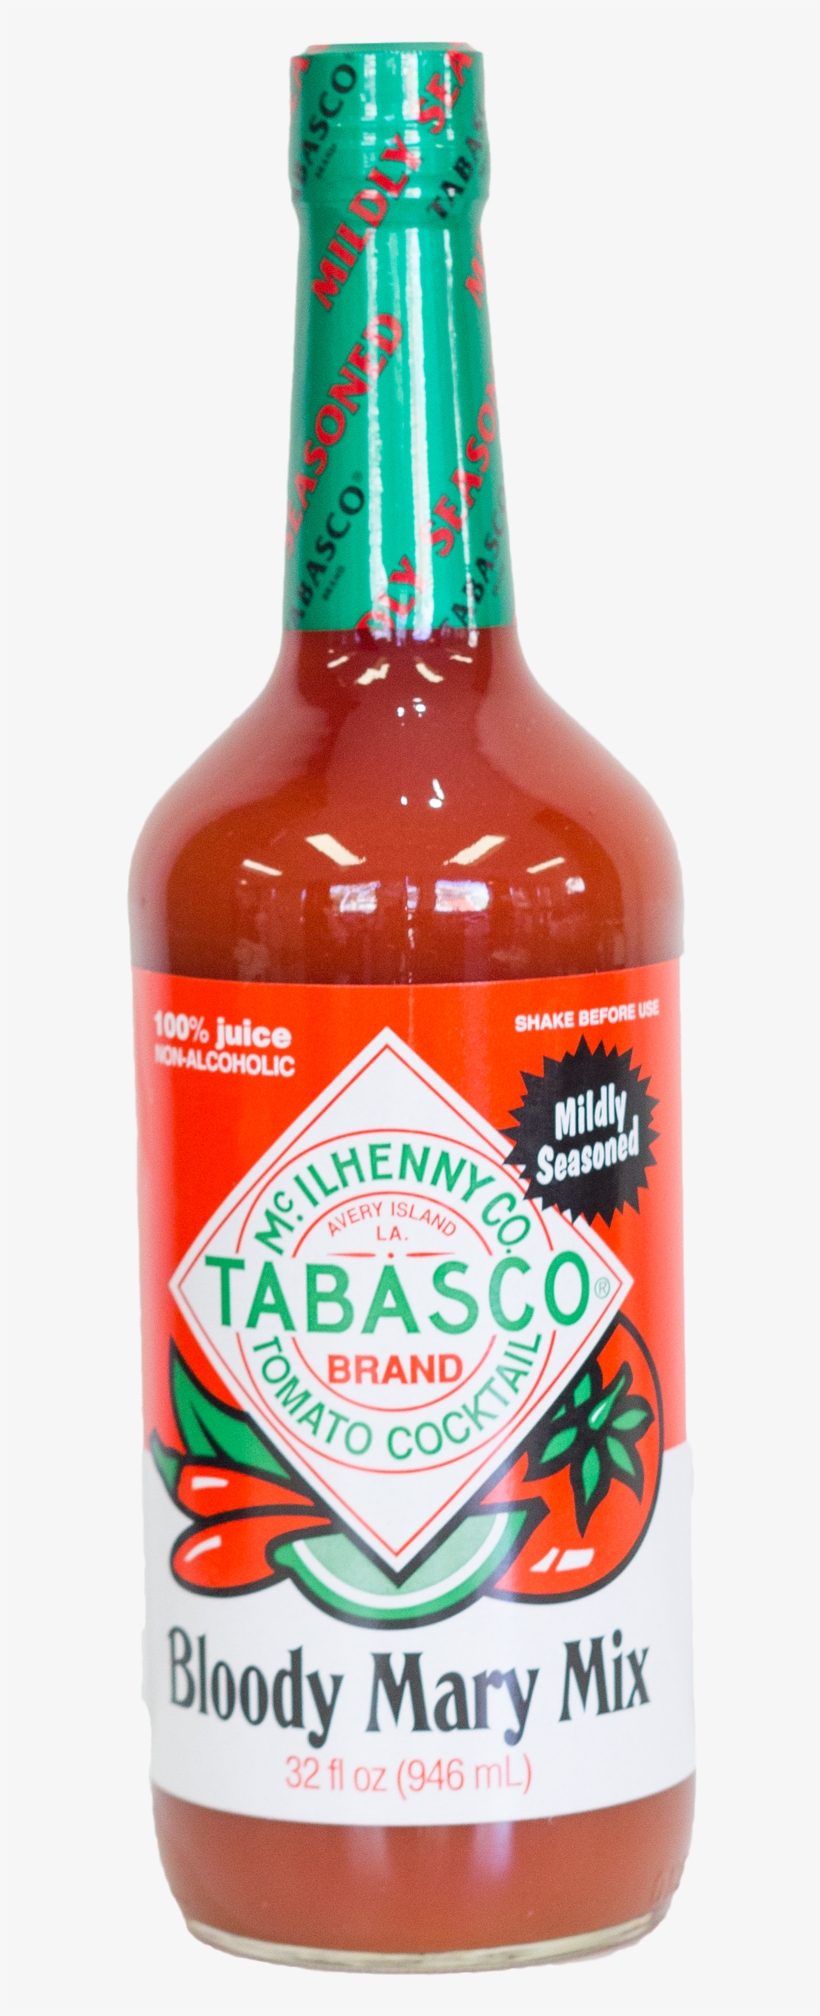 Tabasco Bloody Mary Mix 946ml X - Tabasco Bloody Mary Mix, transparent png #9099154